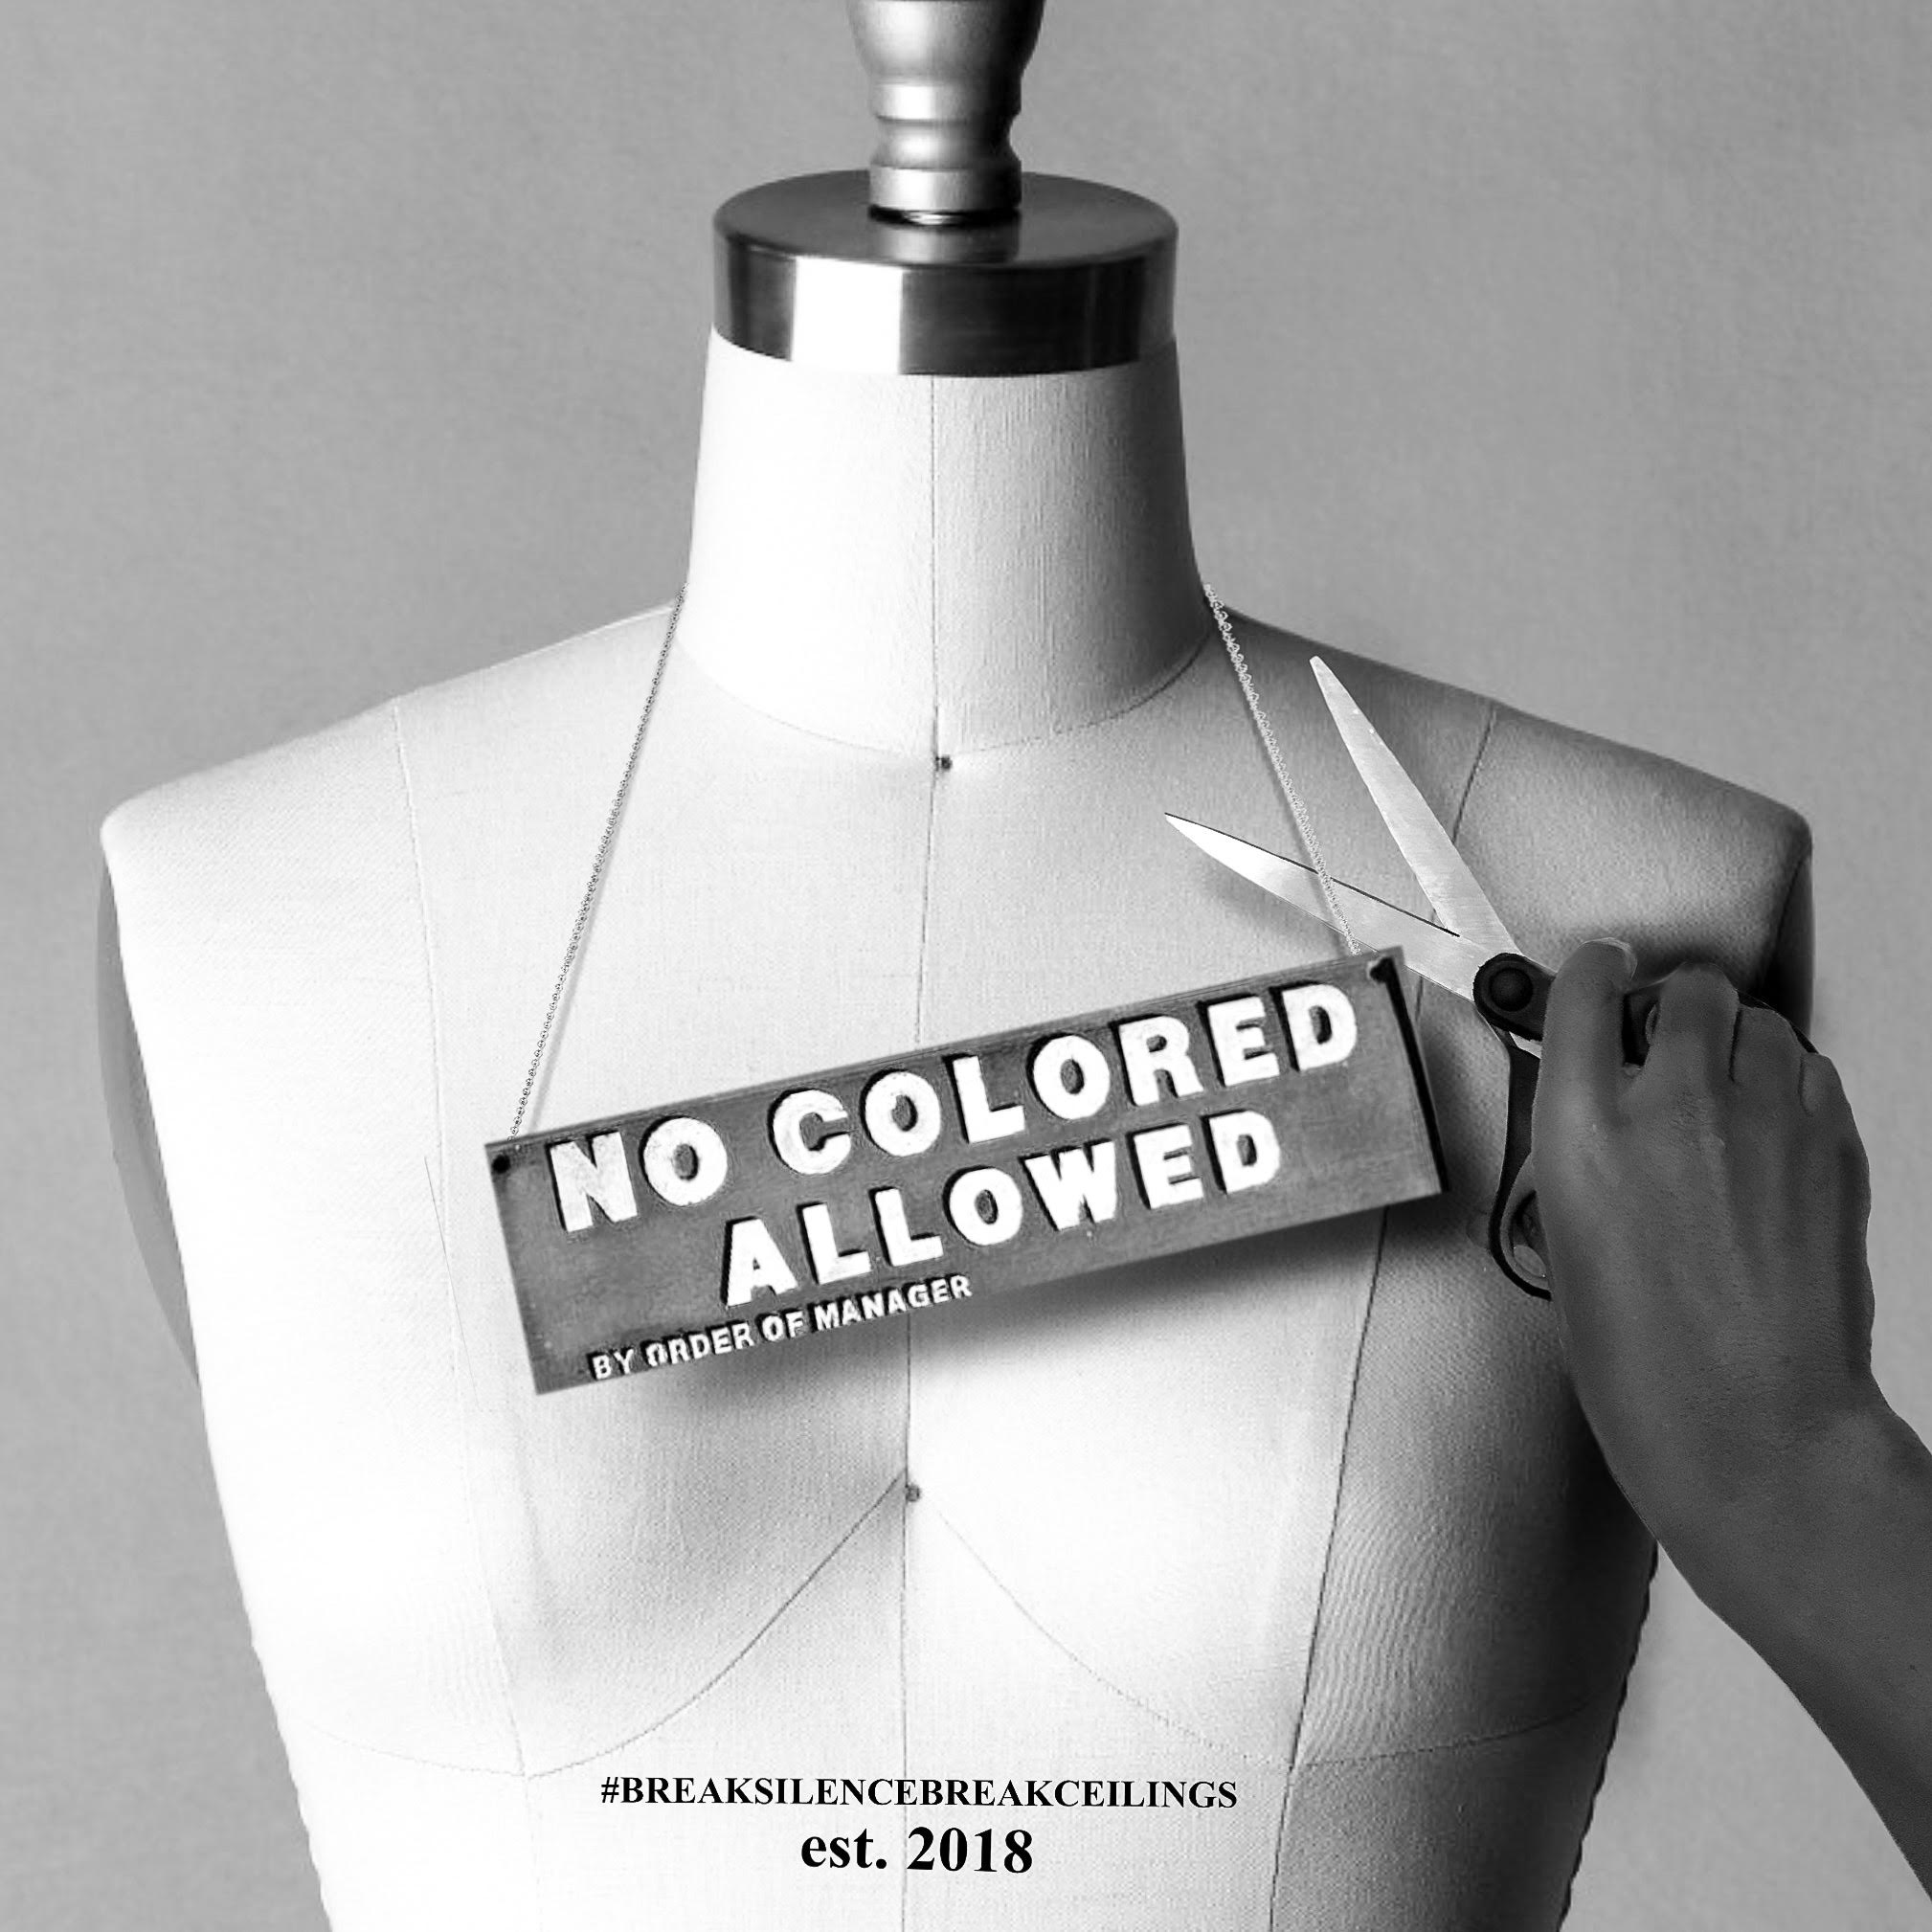 It is time to address the systemic anti-Blackness of the fashion industry